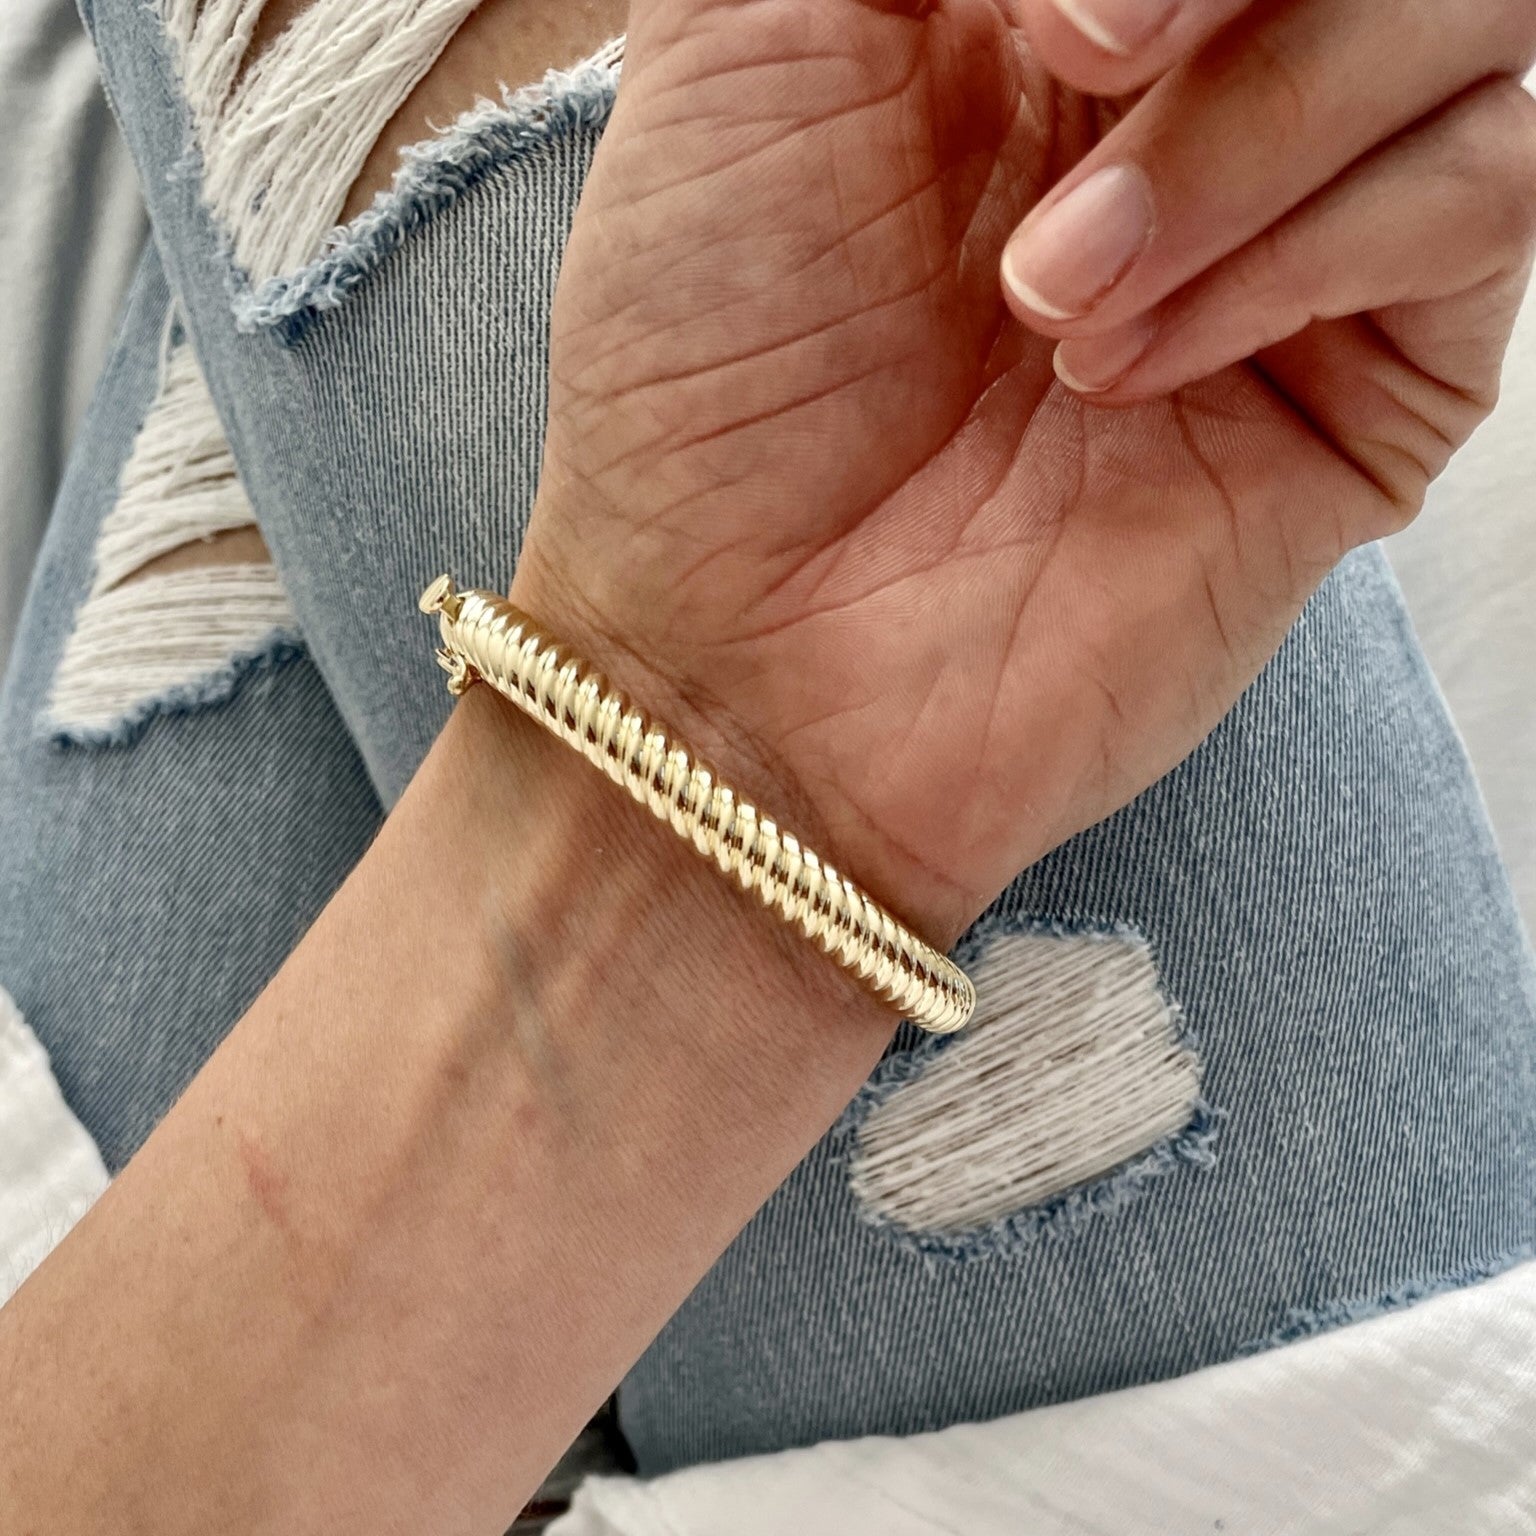 Chunky 14K Gold Twist Cable Bangle